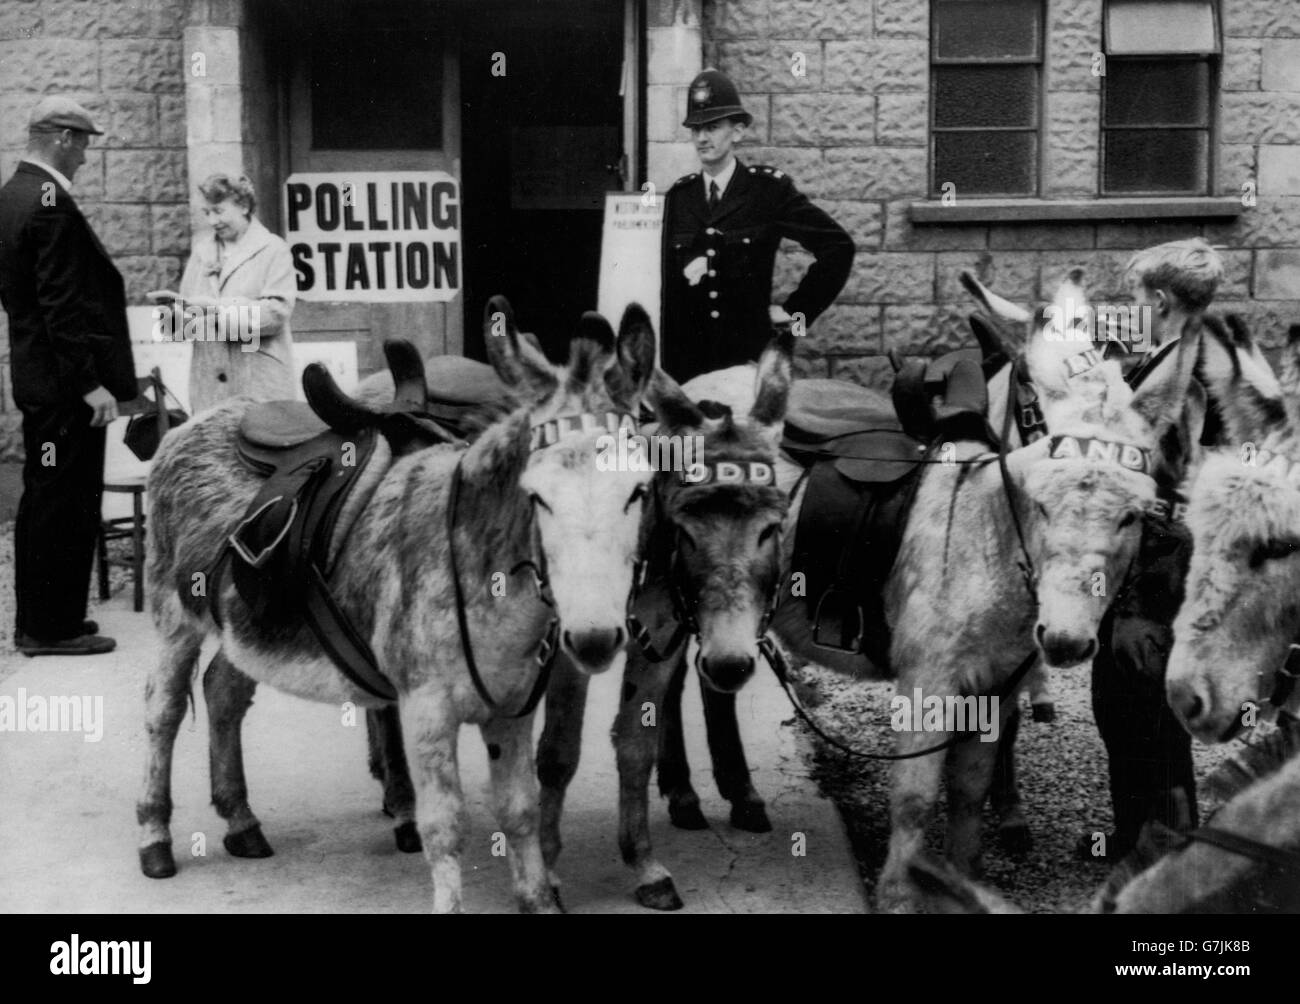 Roland Hill decided to vote in the Parliamentary by-election at Weston-super-Mare while on the way to his donkey-ride pitch on the beach. He parked his donkeys and visited the Sunnyside Methodist Hall to record his vote. *Scanned low-res from print, high-res available on request* Stock Photo